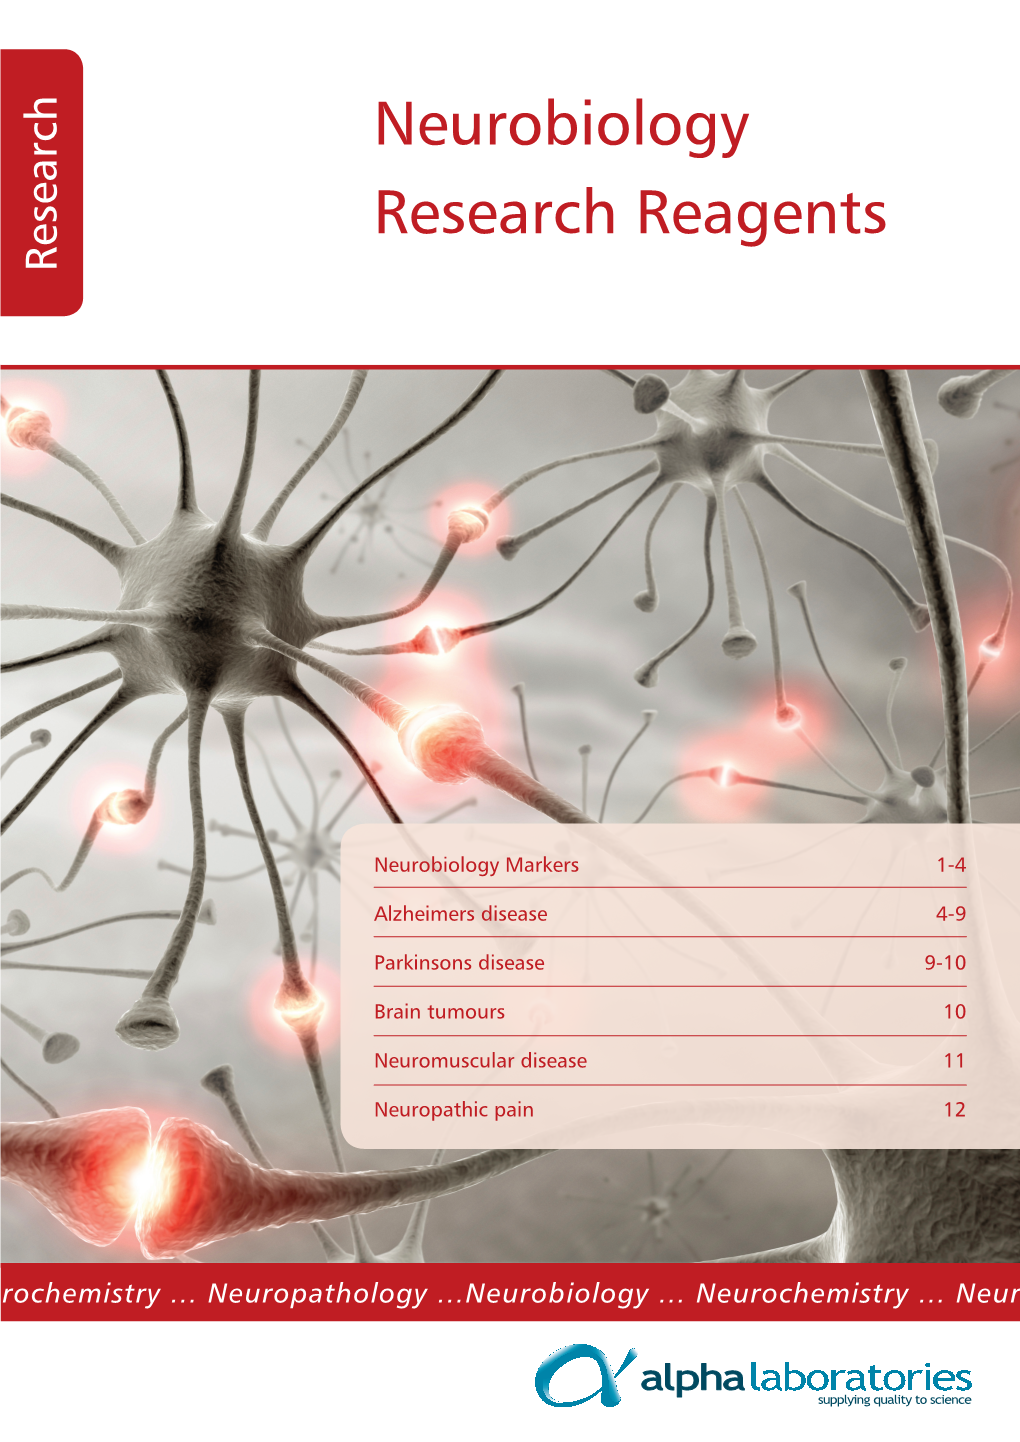 Neurobiology Research Reagents Research